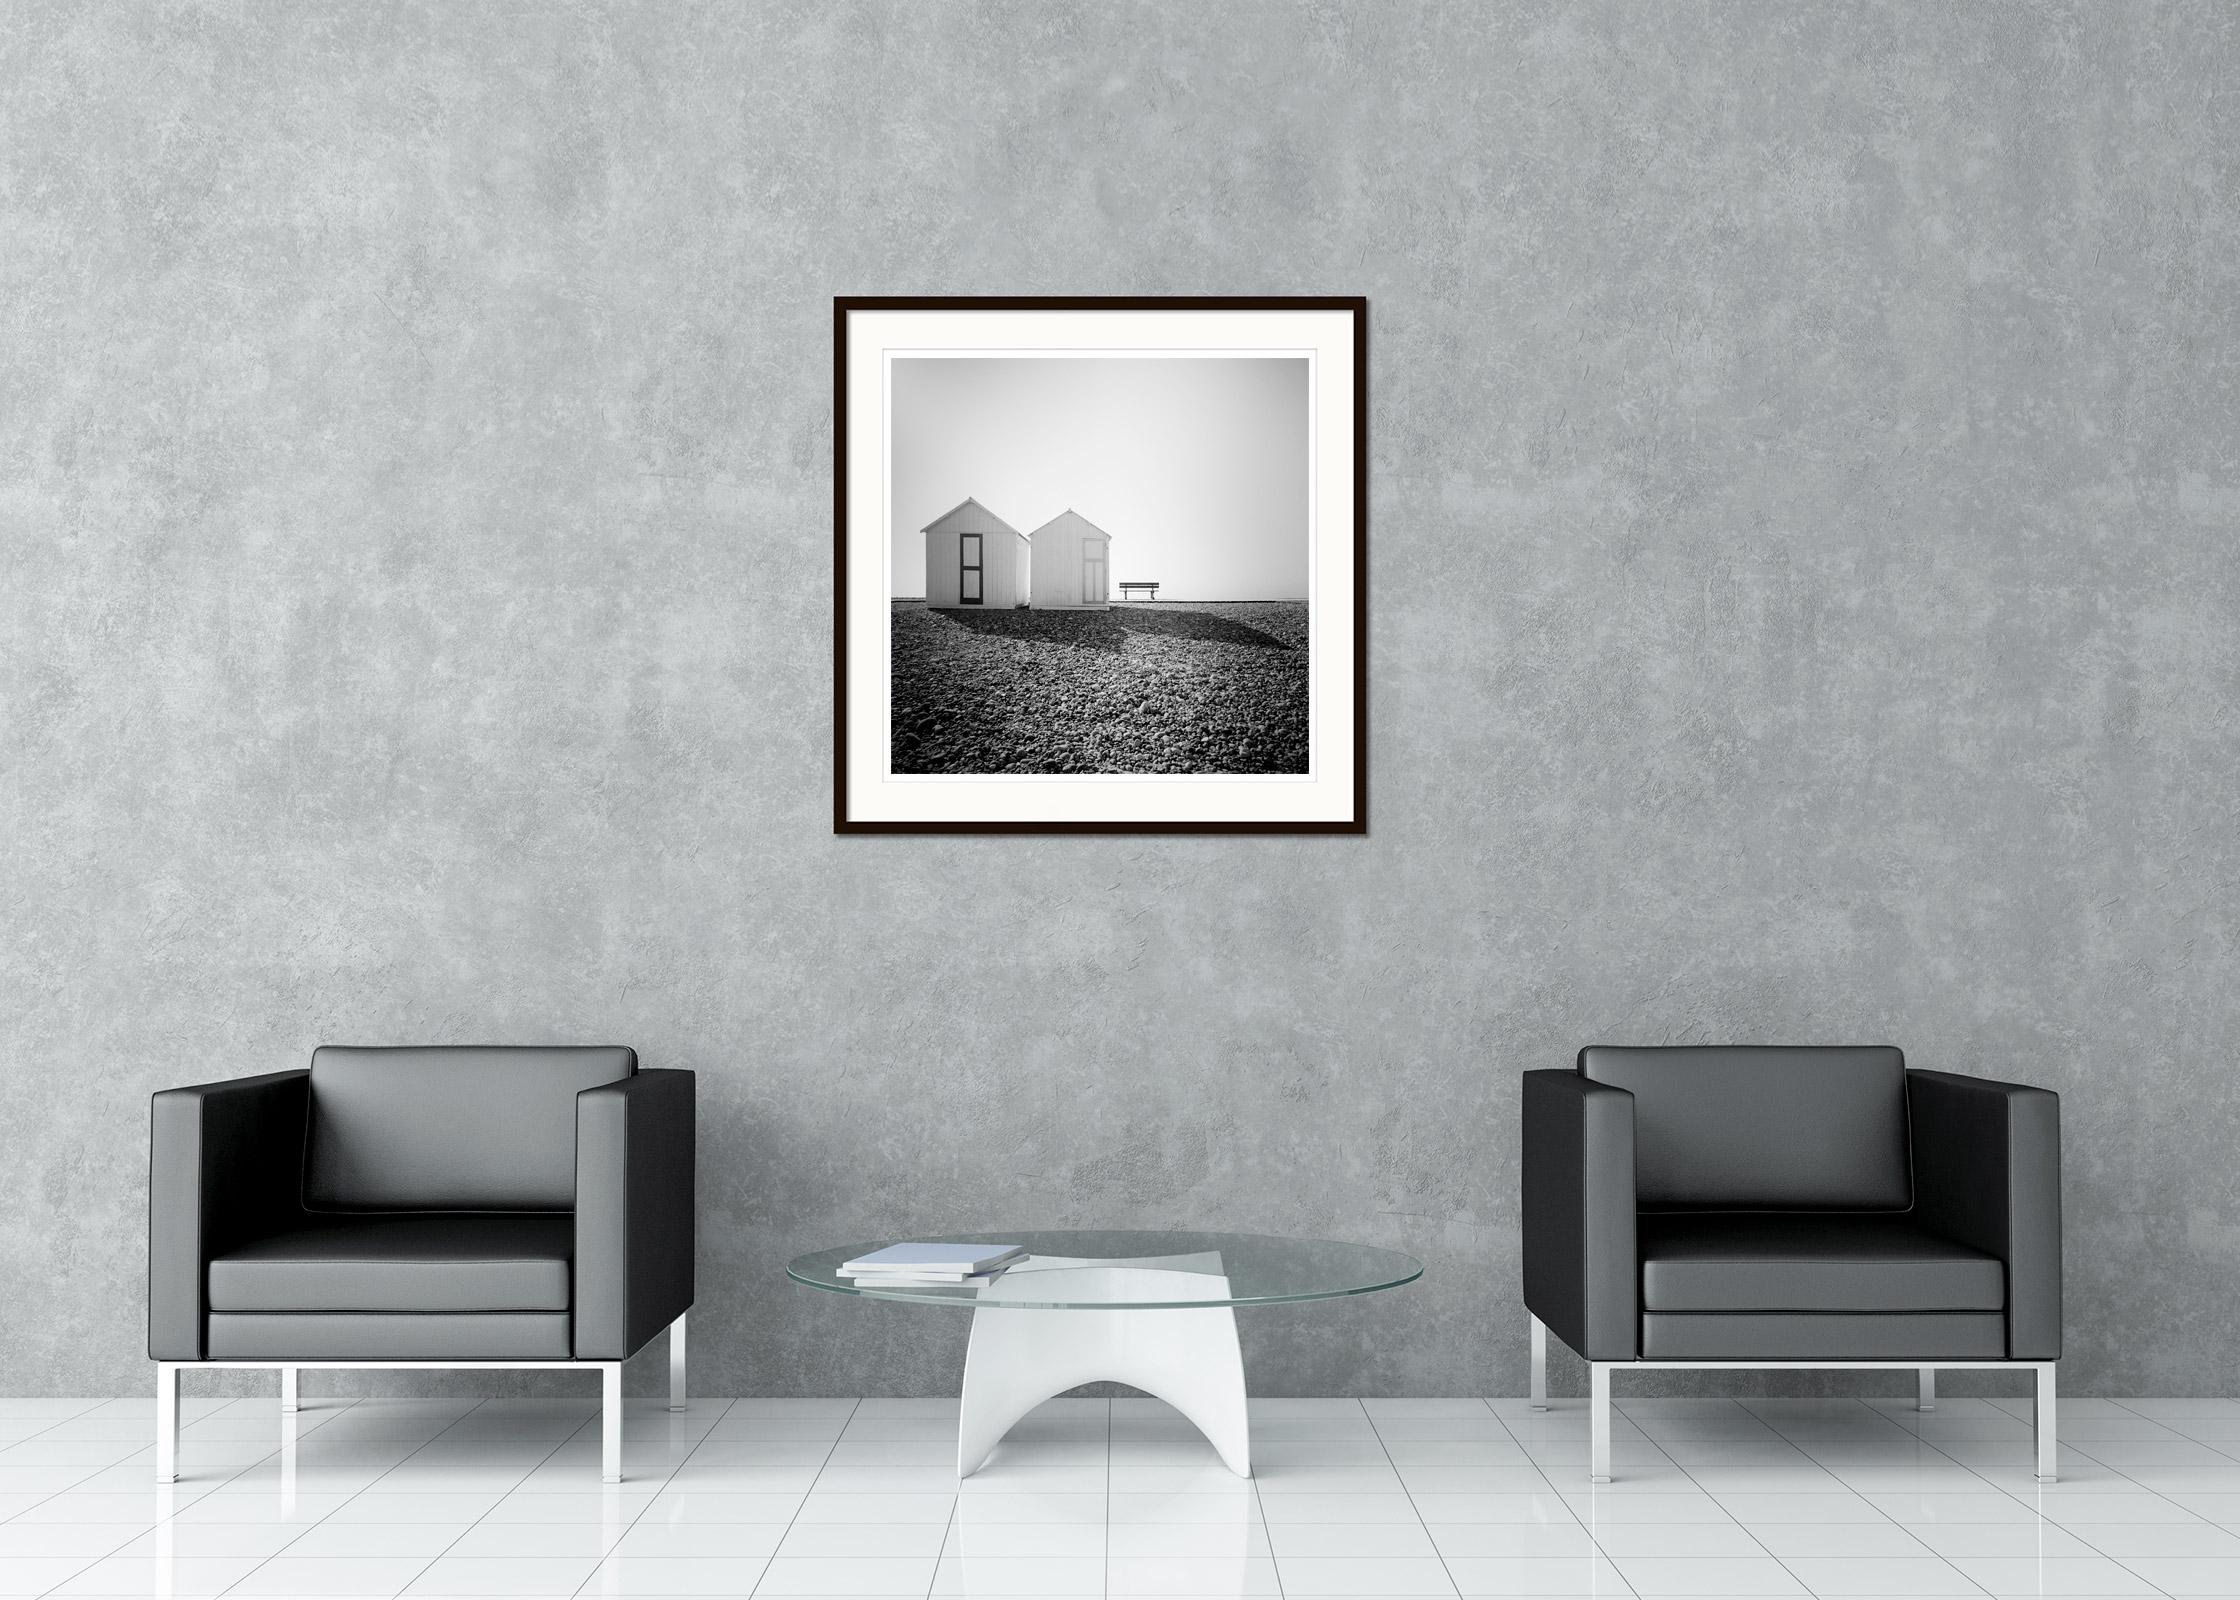 Black and white fine art landscape photography. Romantic beach huts with a bench on the stony beach of France. Archival pigment ink print, edition of 9. Signed, titled, dated and numbered by artist. Certificate of authenticity included. Printed with